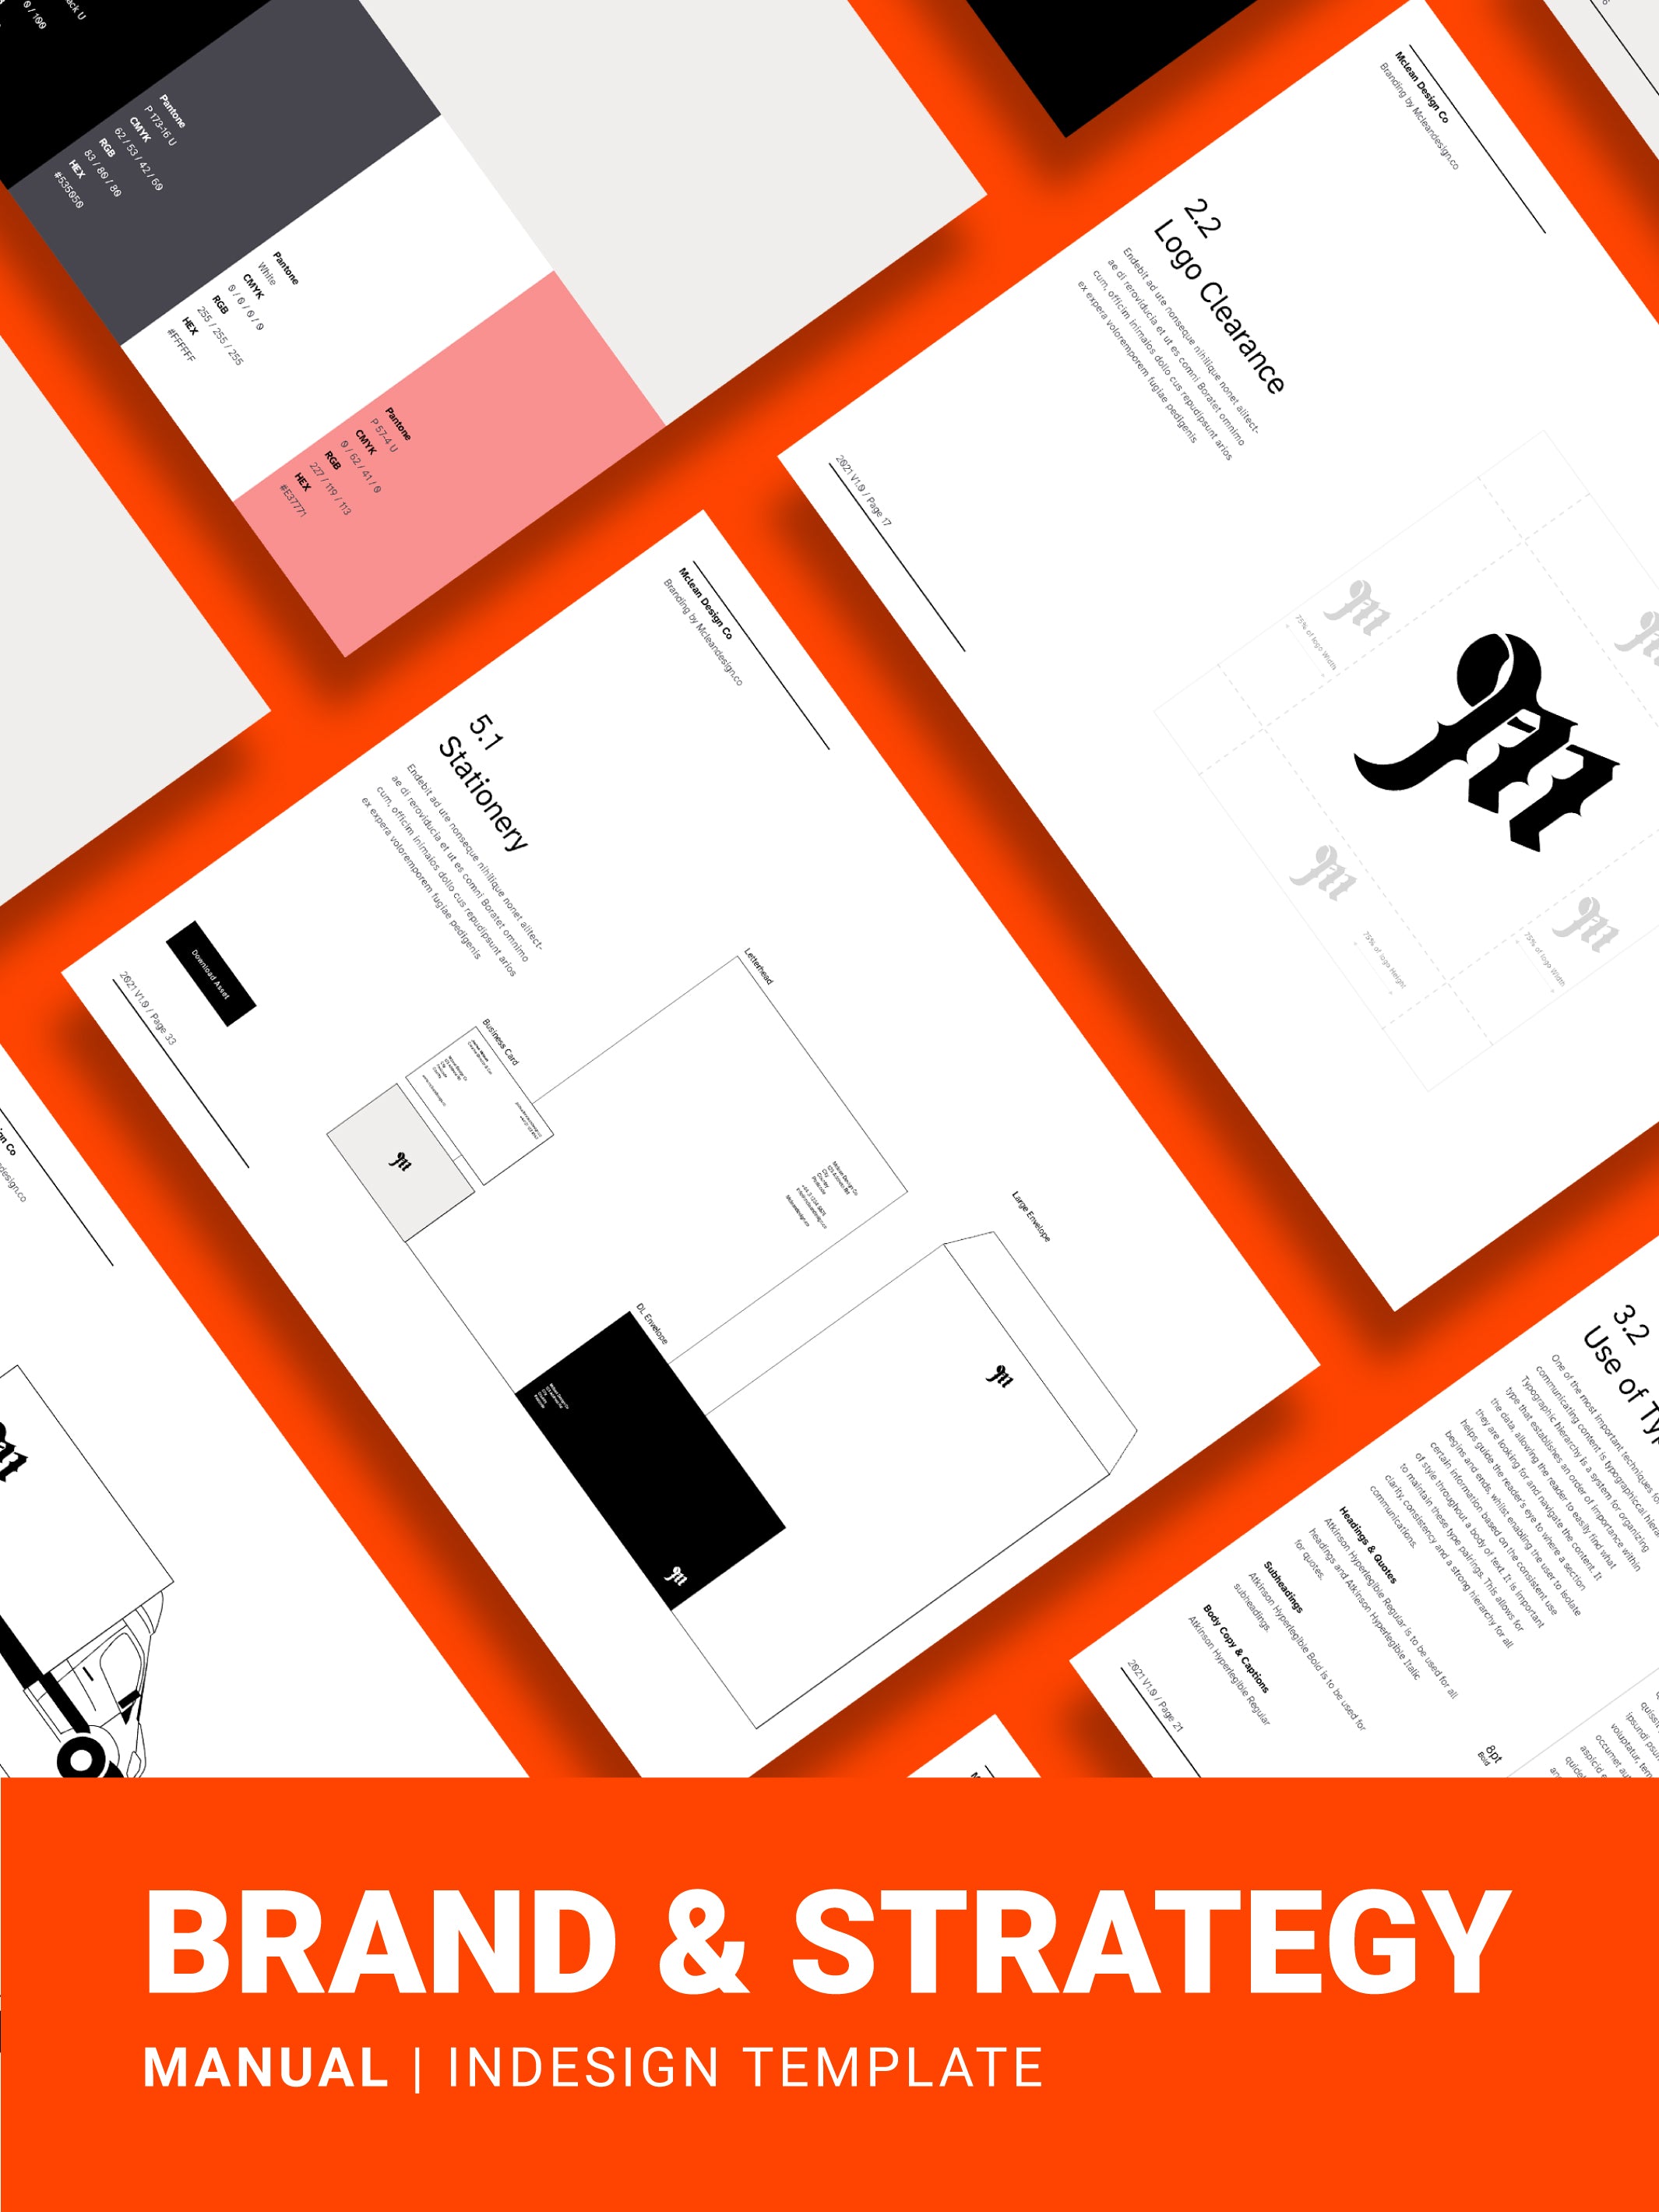 Brand Manual & Strategy Template